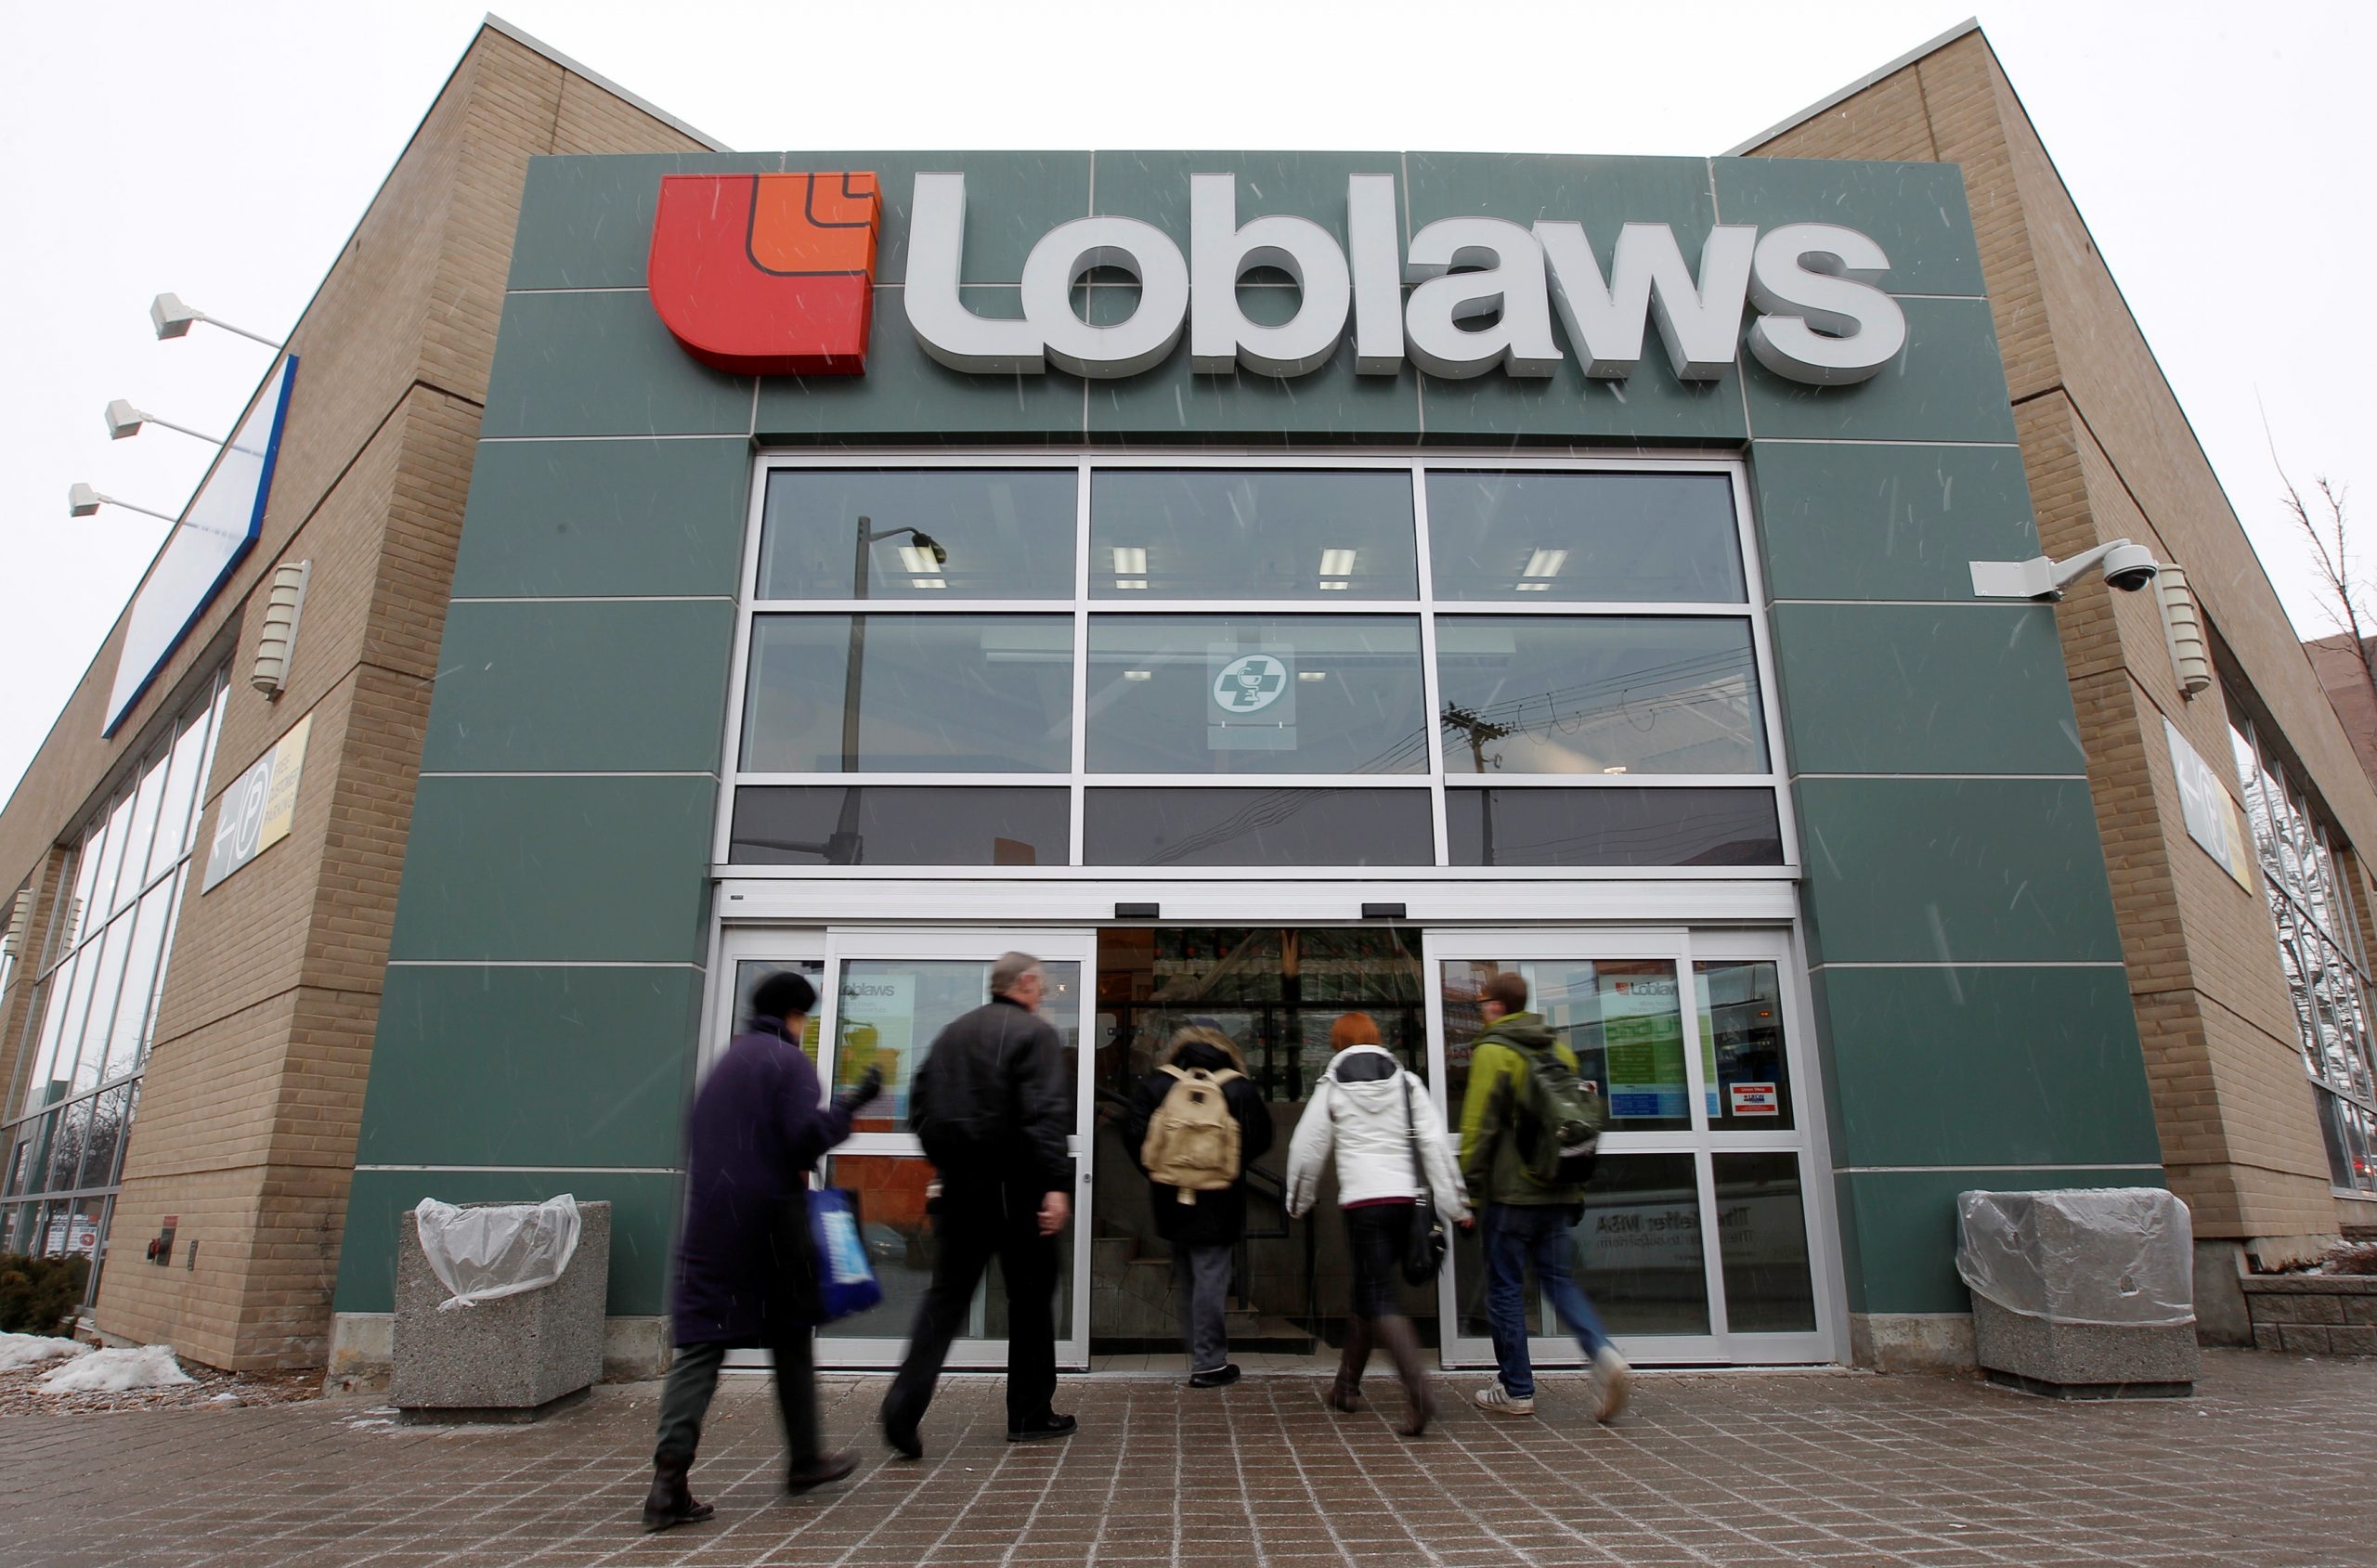 Loblaws' criticized for decision to end No Name price freeze